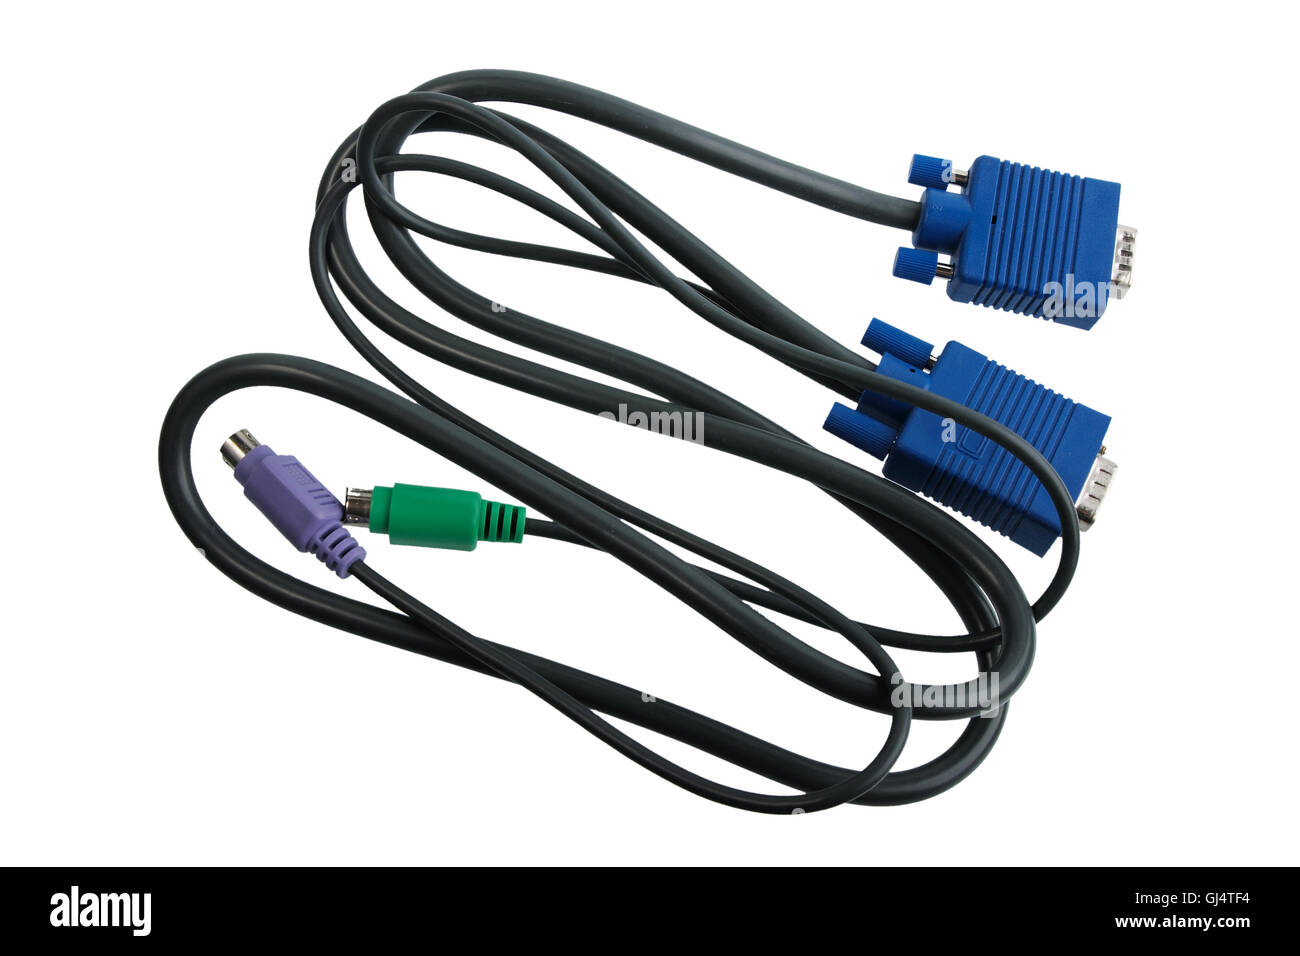 Cable for monitor commutation. Stock Photo